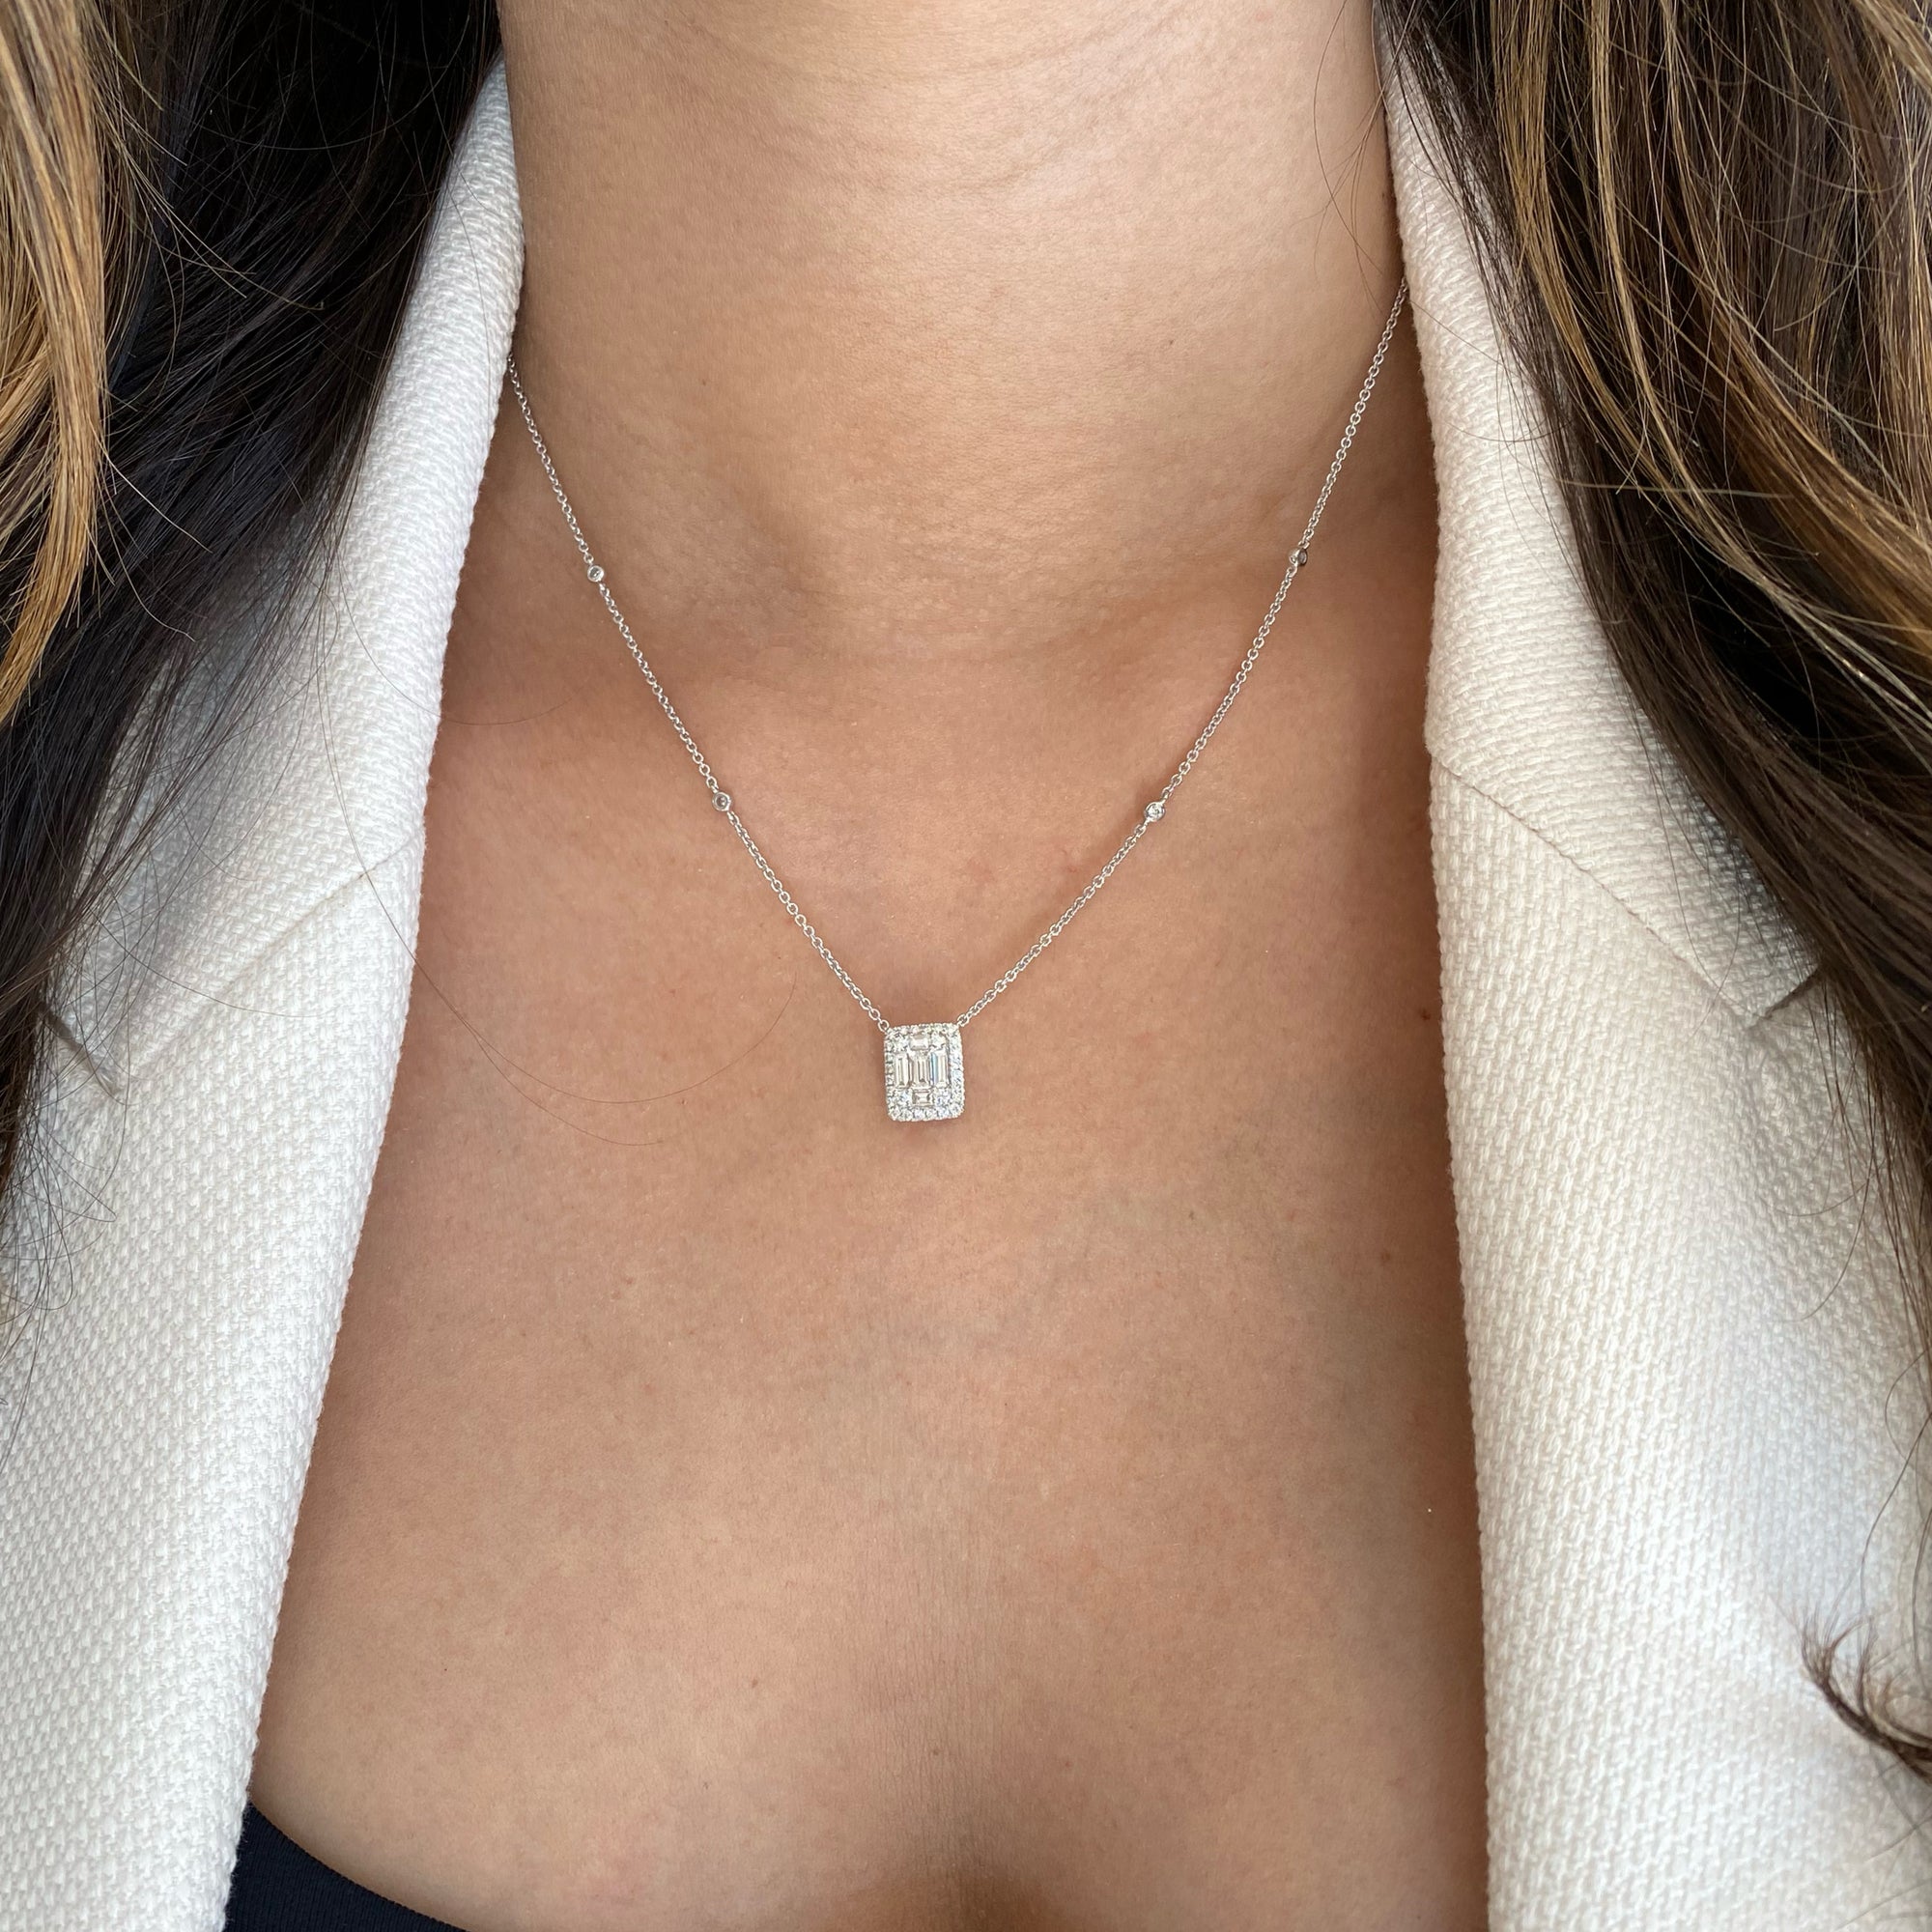 Solid 18k white gold weighing 4.22 grams with 32 round diamonds weighing 0.29 carats and 5 slim baguettes weighing 0.45 carats Emerald-Cut Diamond Illusion Pendant Necklace | Nuha Jewelers